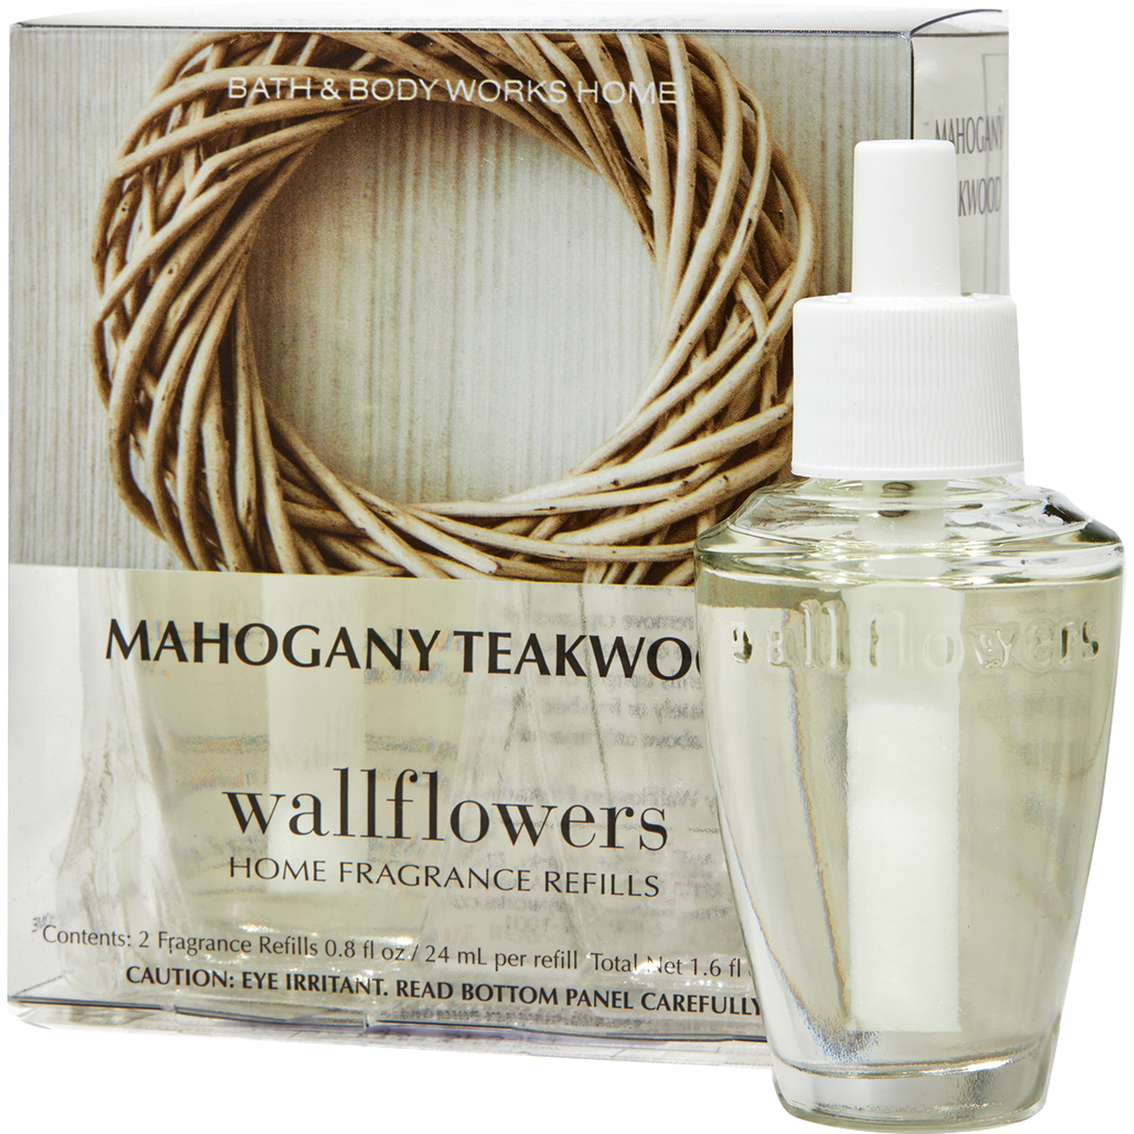 Mahogany Teakwood Collection | Bath and Body Works